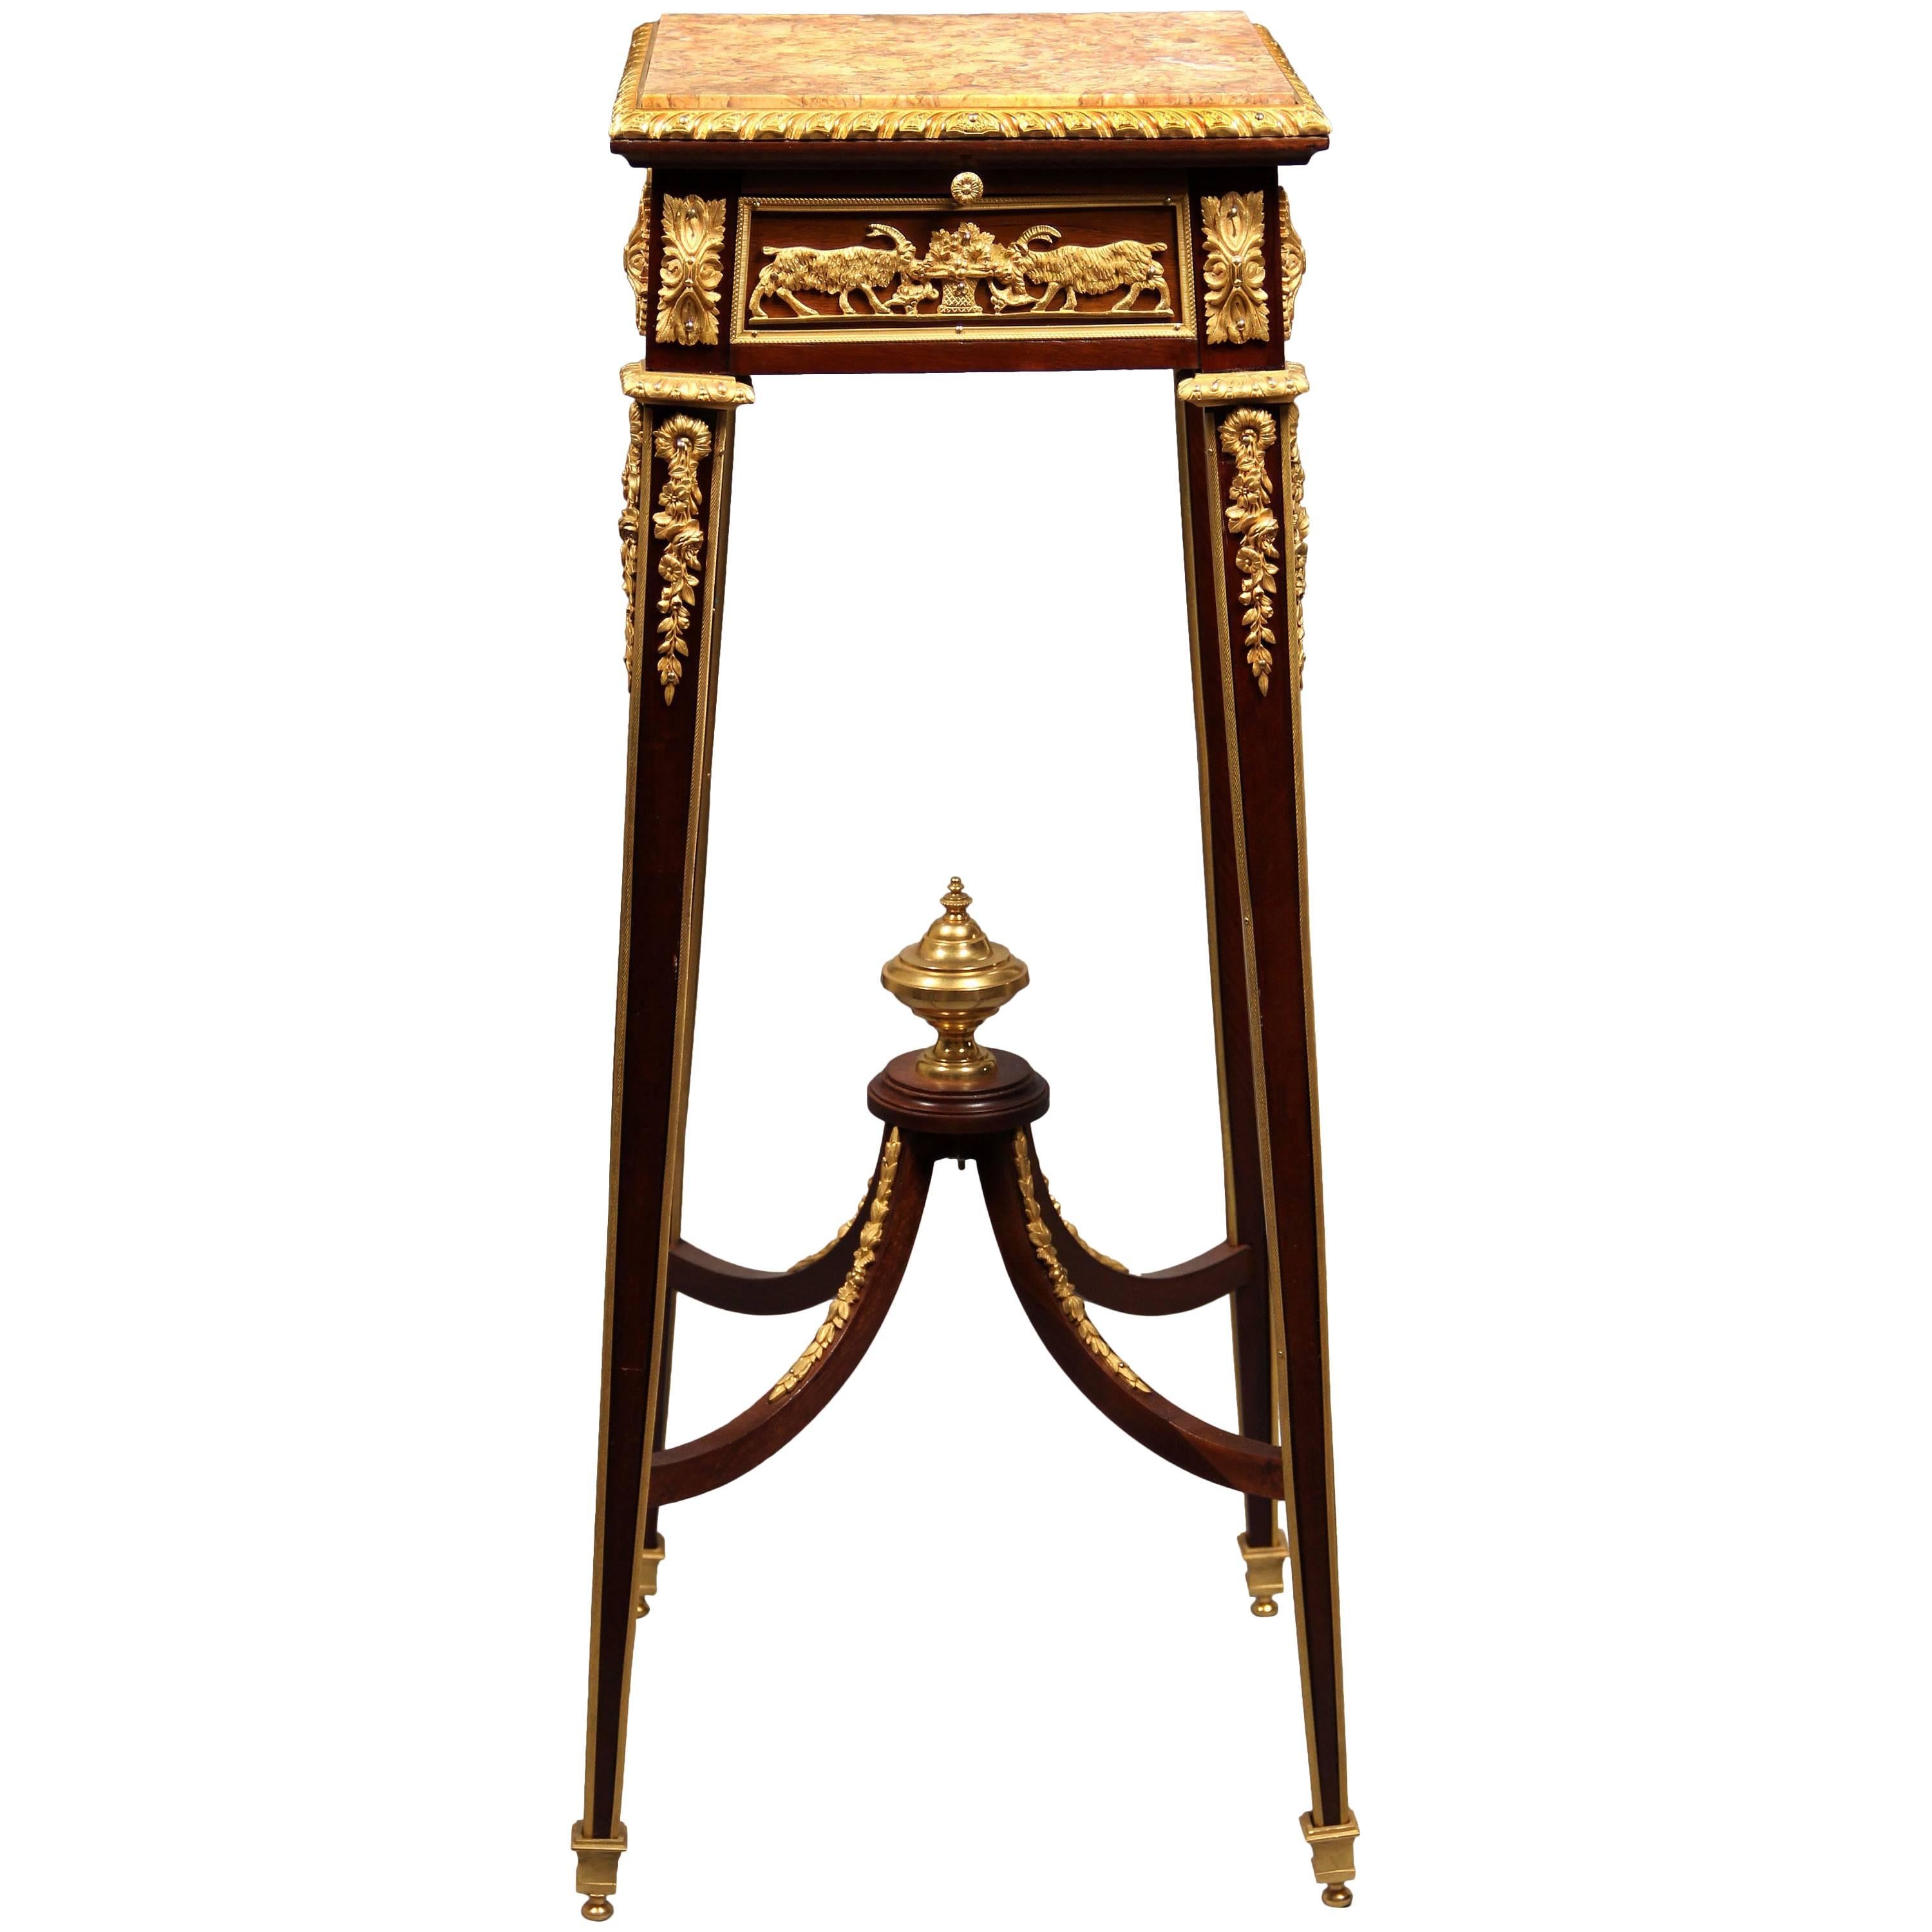 Late 19th Century Gilt Bronze-Mounted Marble-Top Pedestal